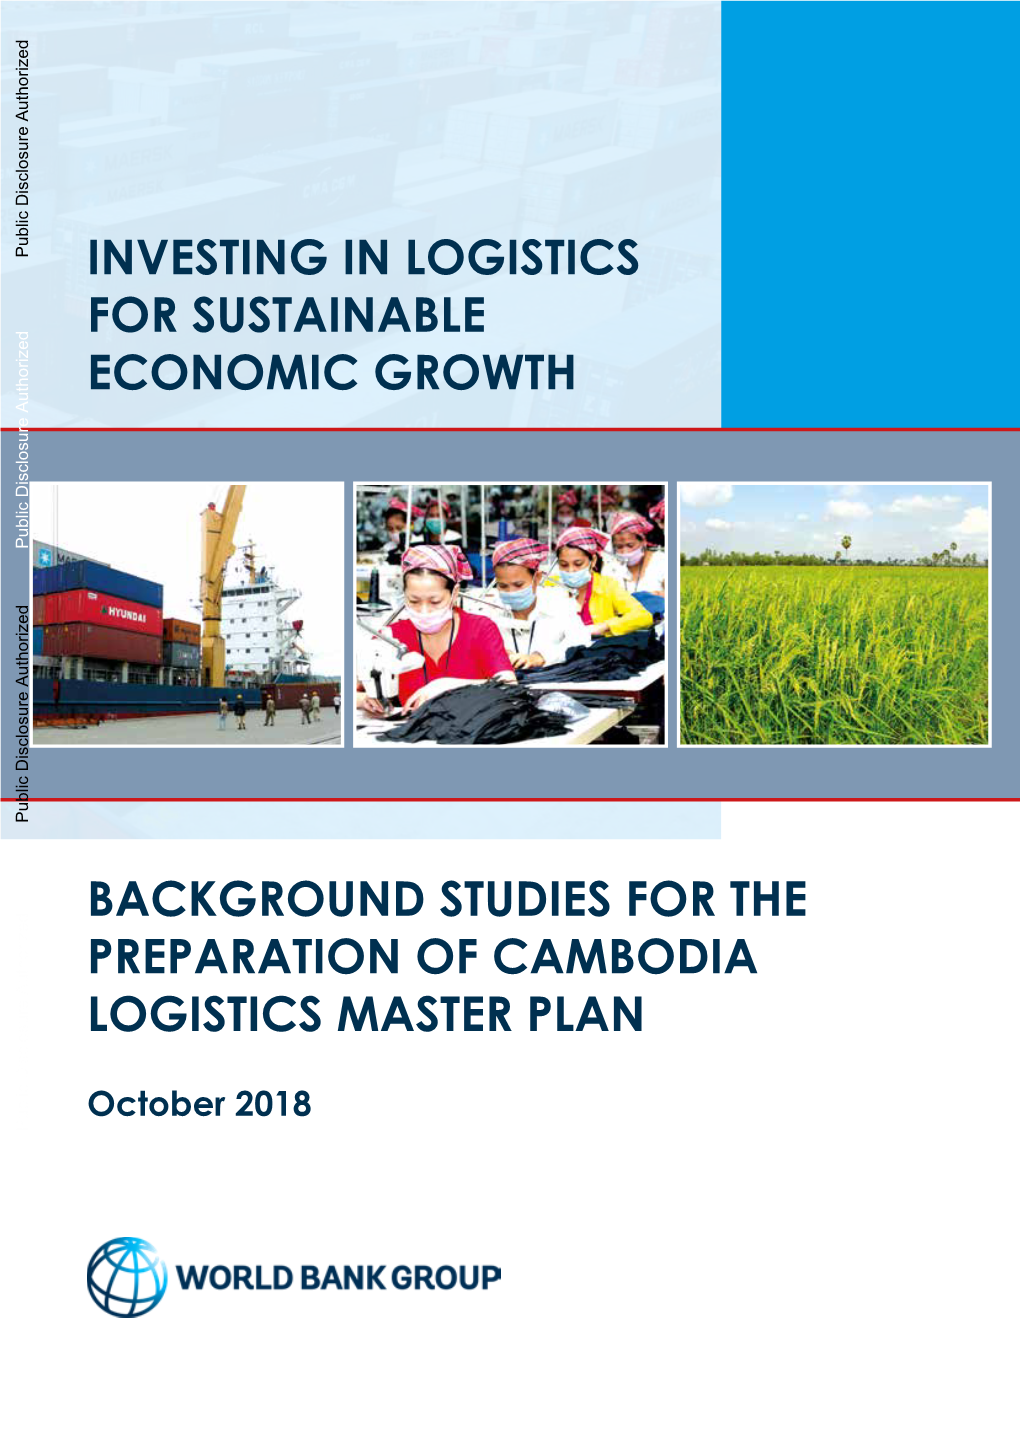 Investing in Logistics for Sustainable Economic Growth Background